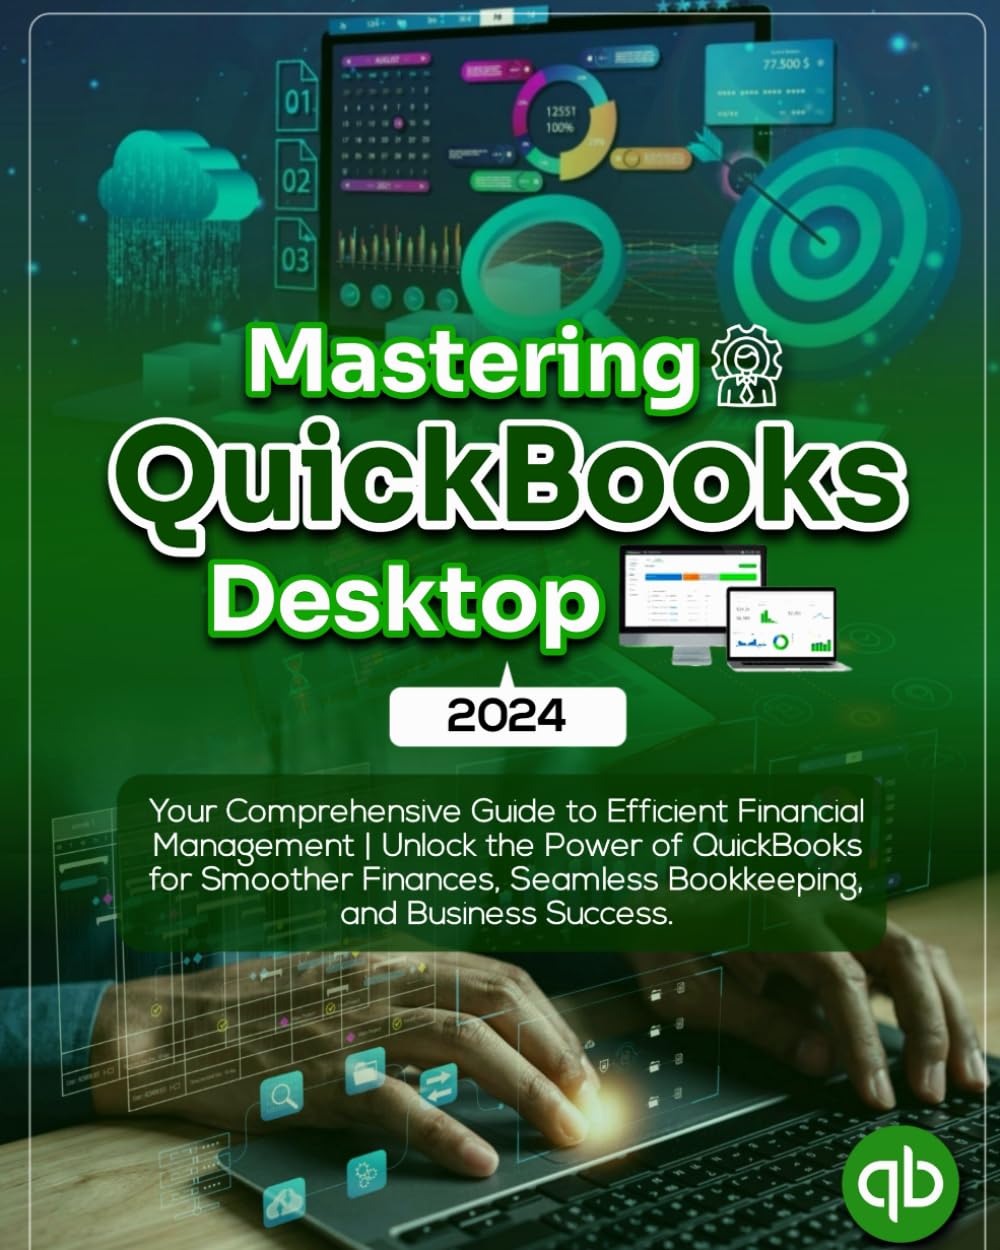 Mastering QuickBooks Desktop 2024: Your Comprehensive Guide to Efficient Financial Management | Unlock the Power of QuickBooks for Smoother Finances, Seamless Bookkeeping, and Business Success